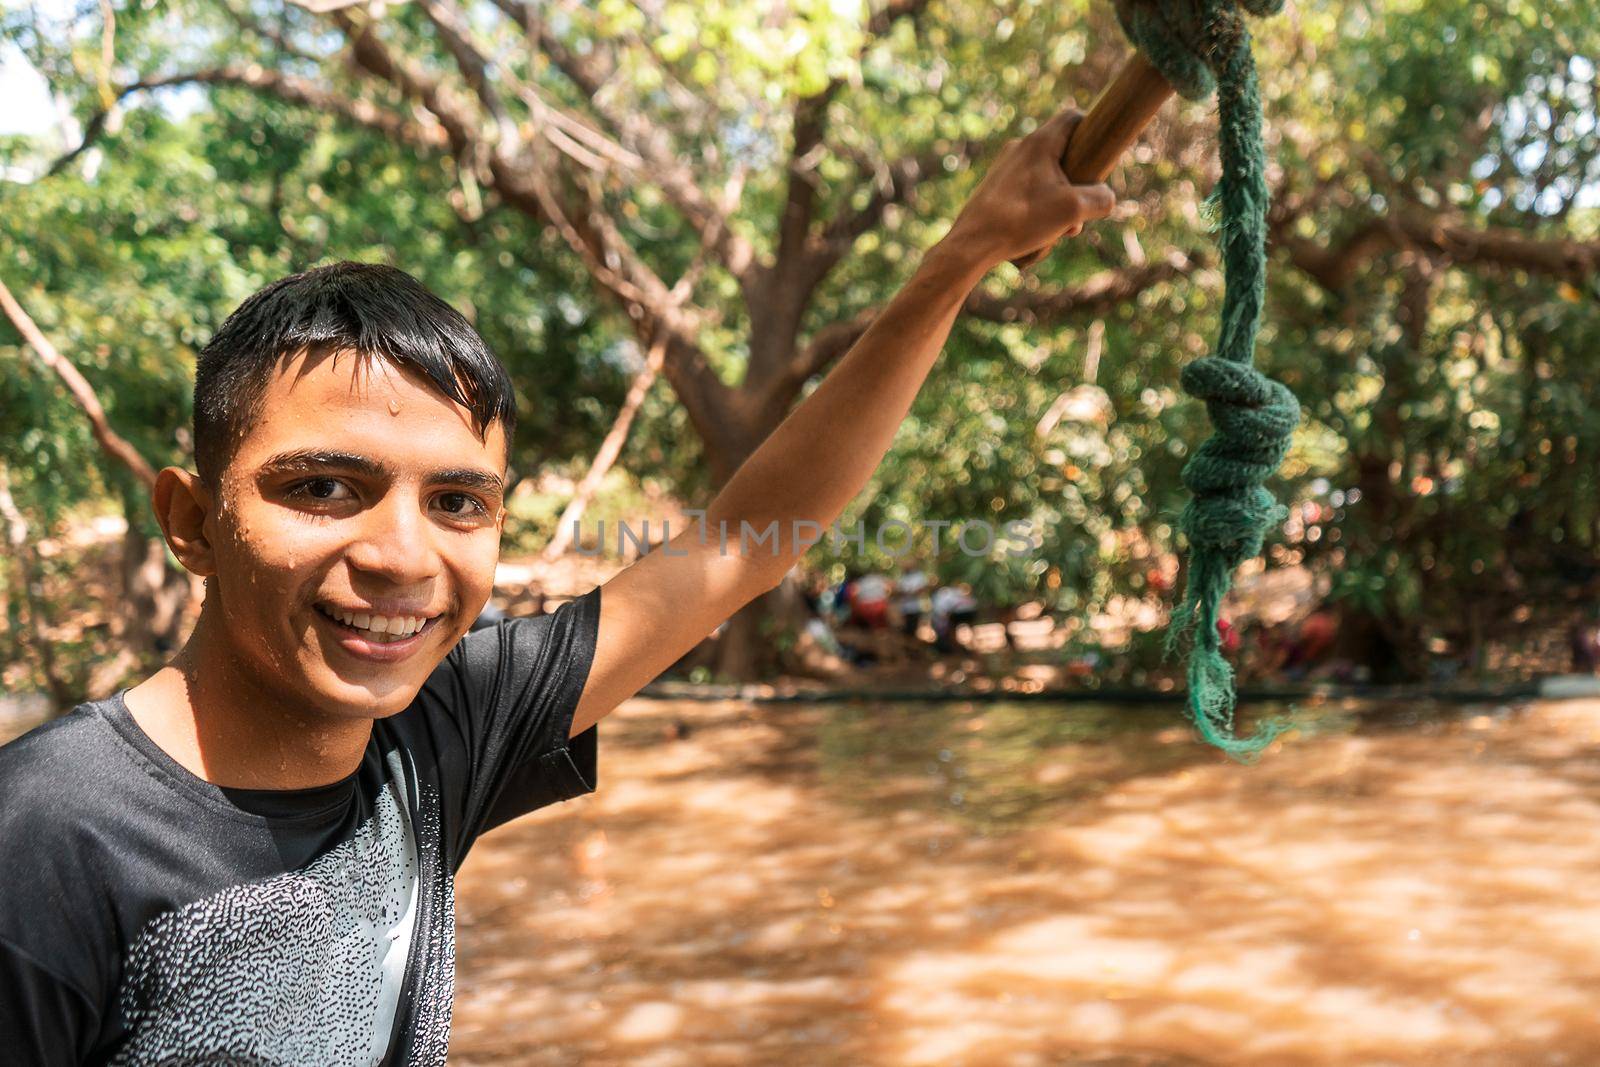 Latin teen smiling and looking at camera holding a hand swing while having fun at a lake in the summer